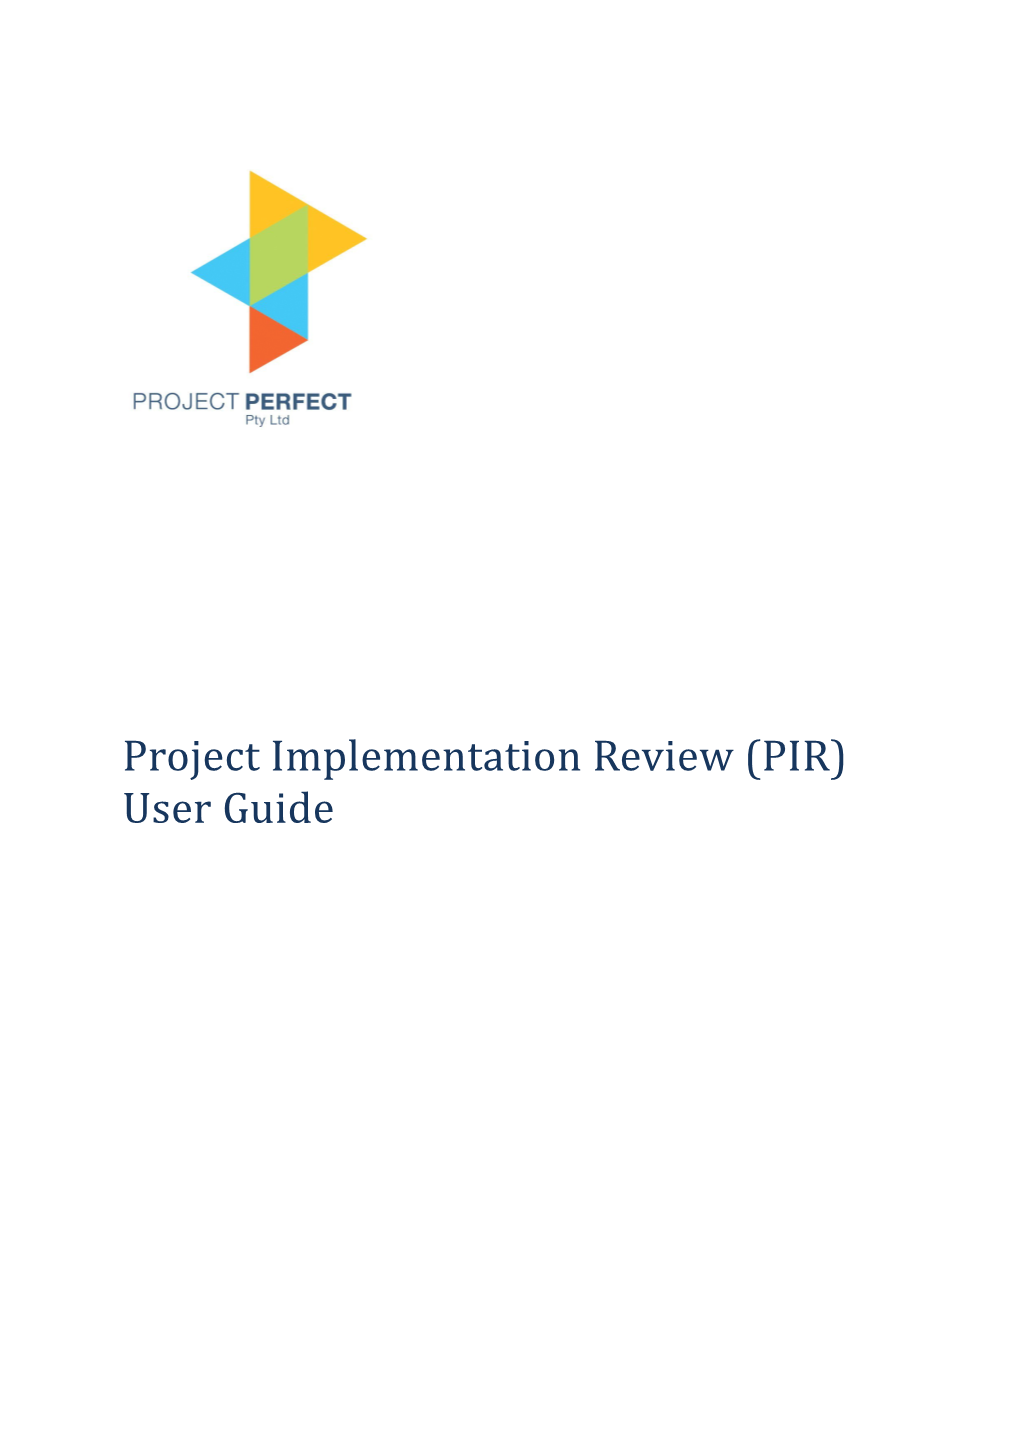 Project Implementation Review (PIR) User Guide